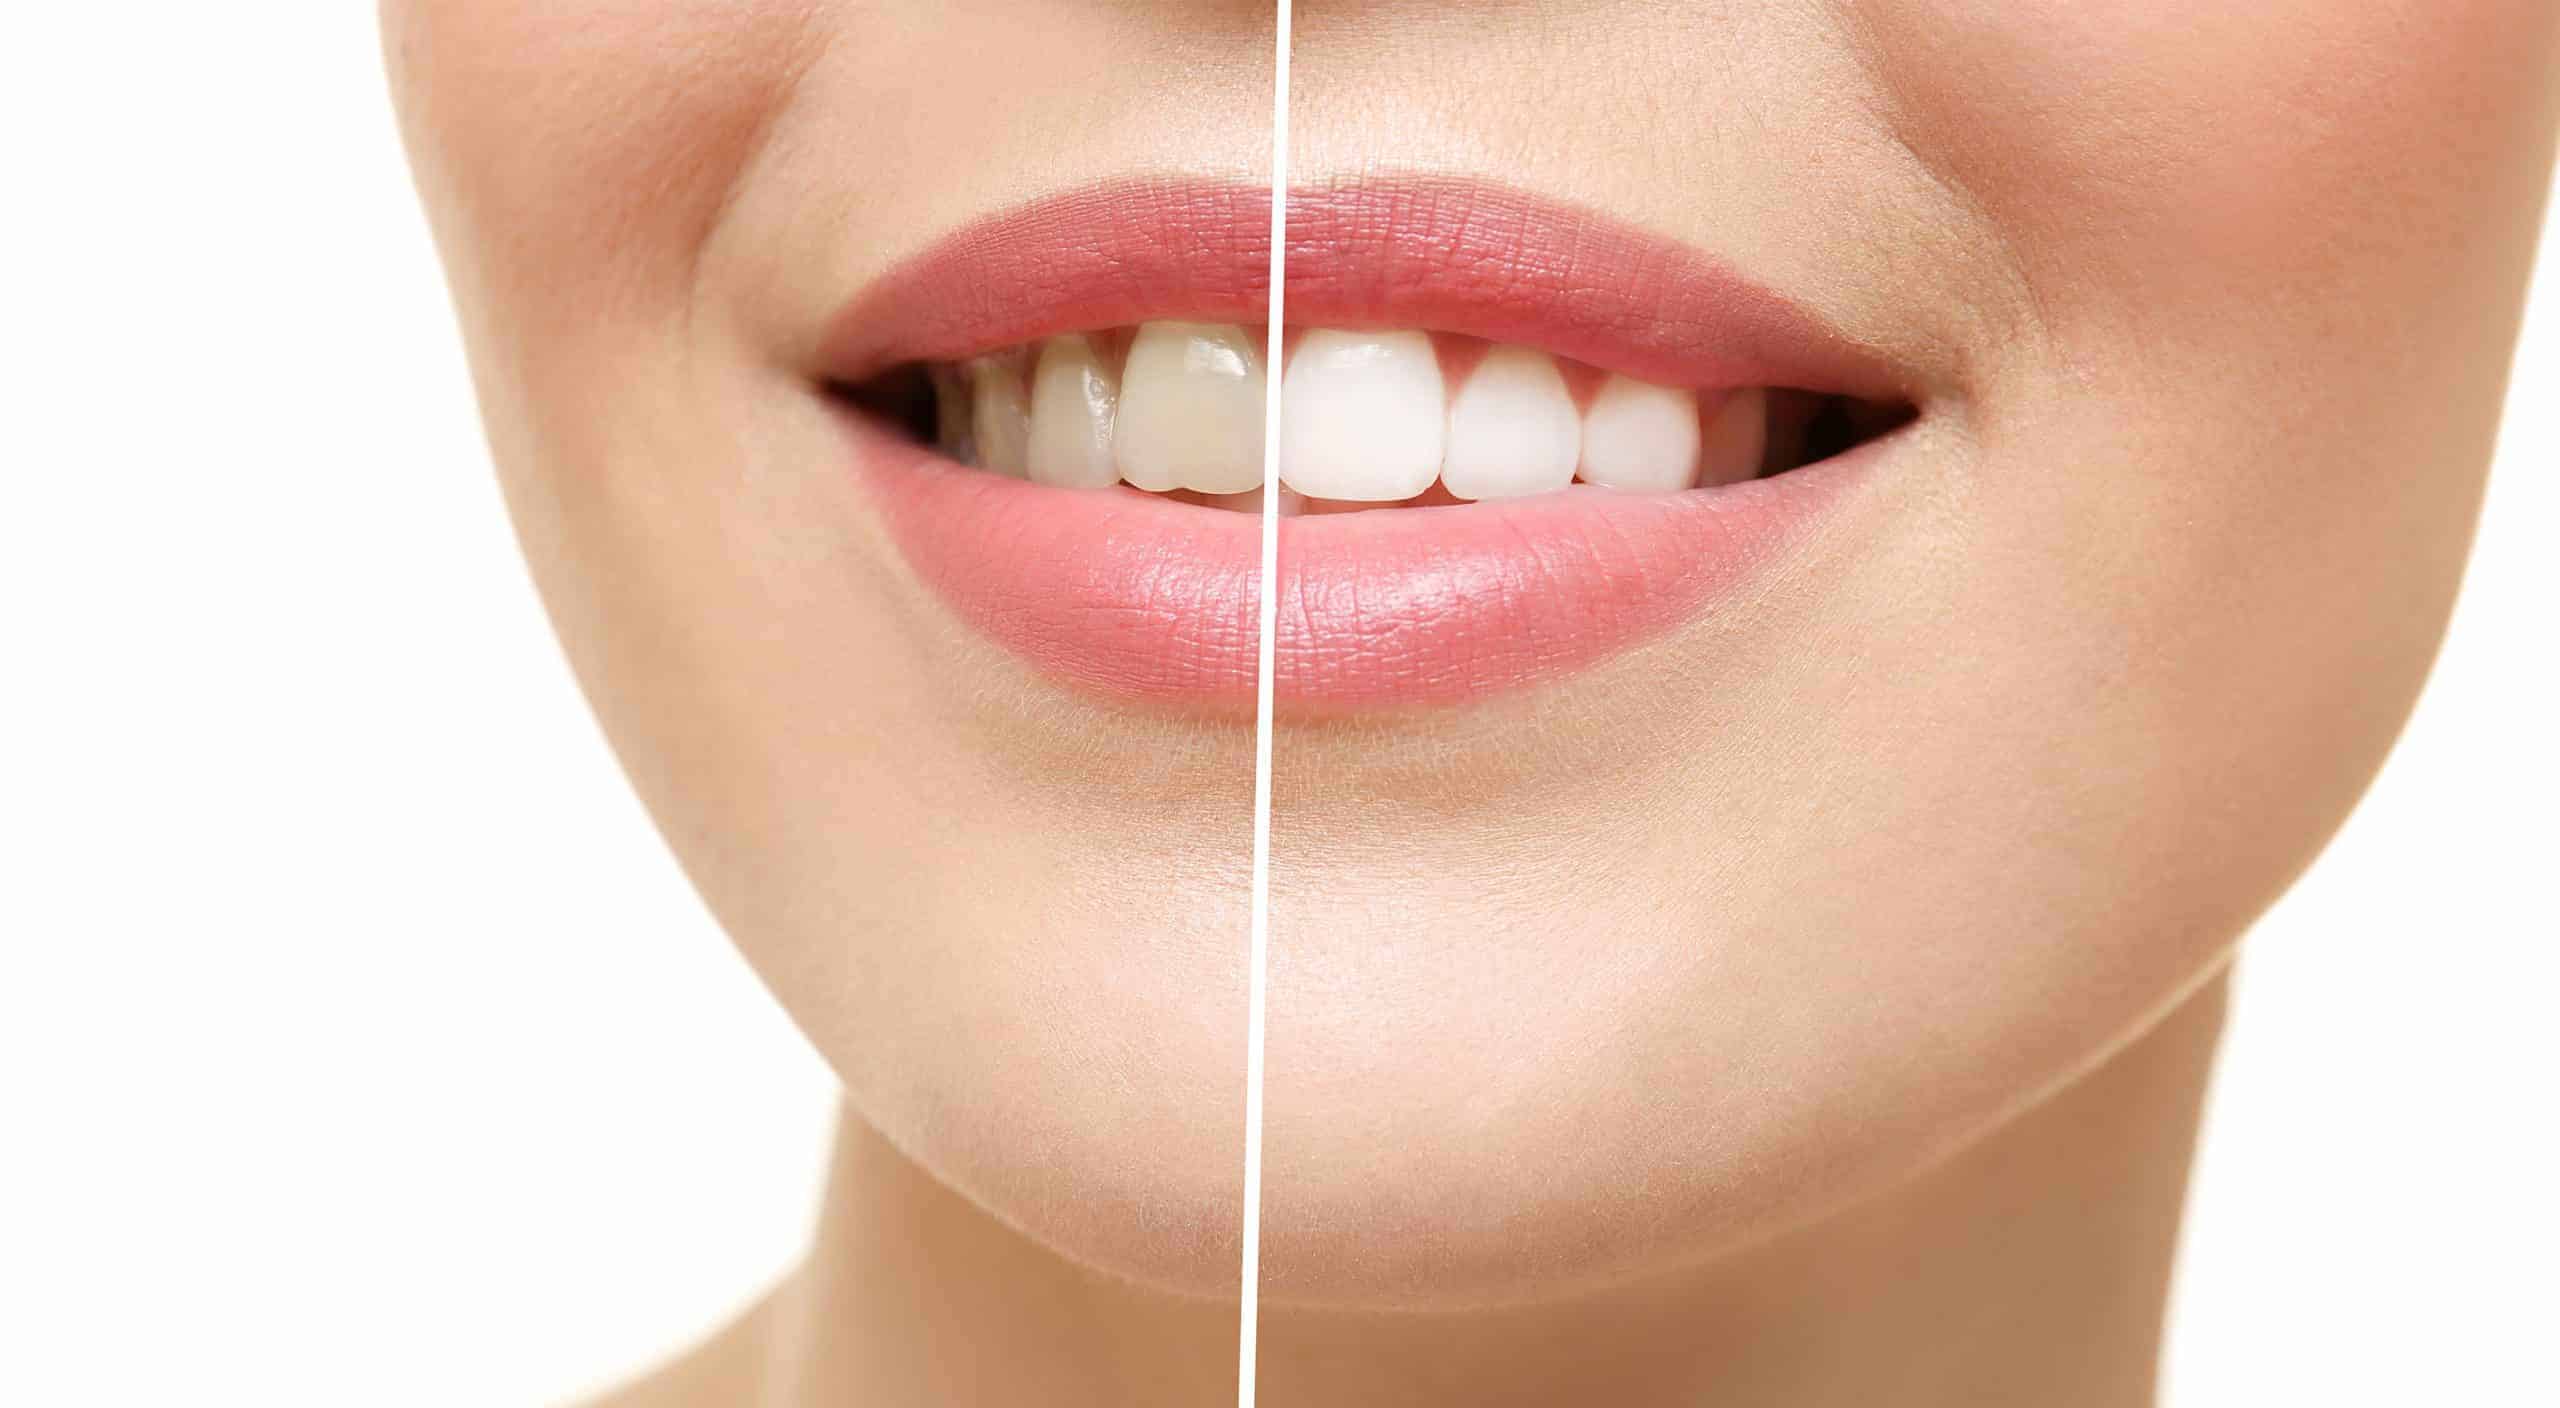 Can You Whiten Teeth with Cracks Using Philips Zoom Lamp?